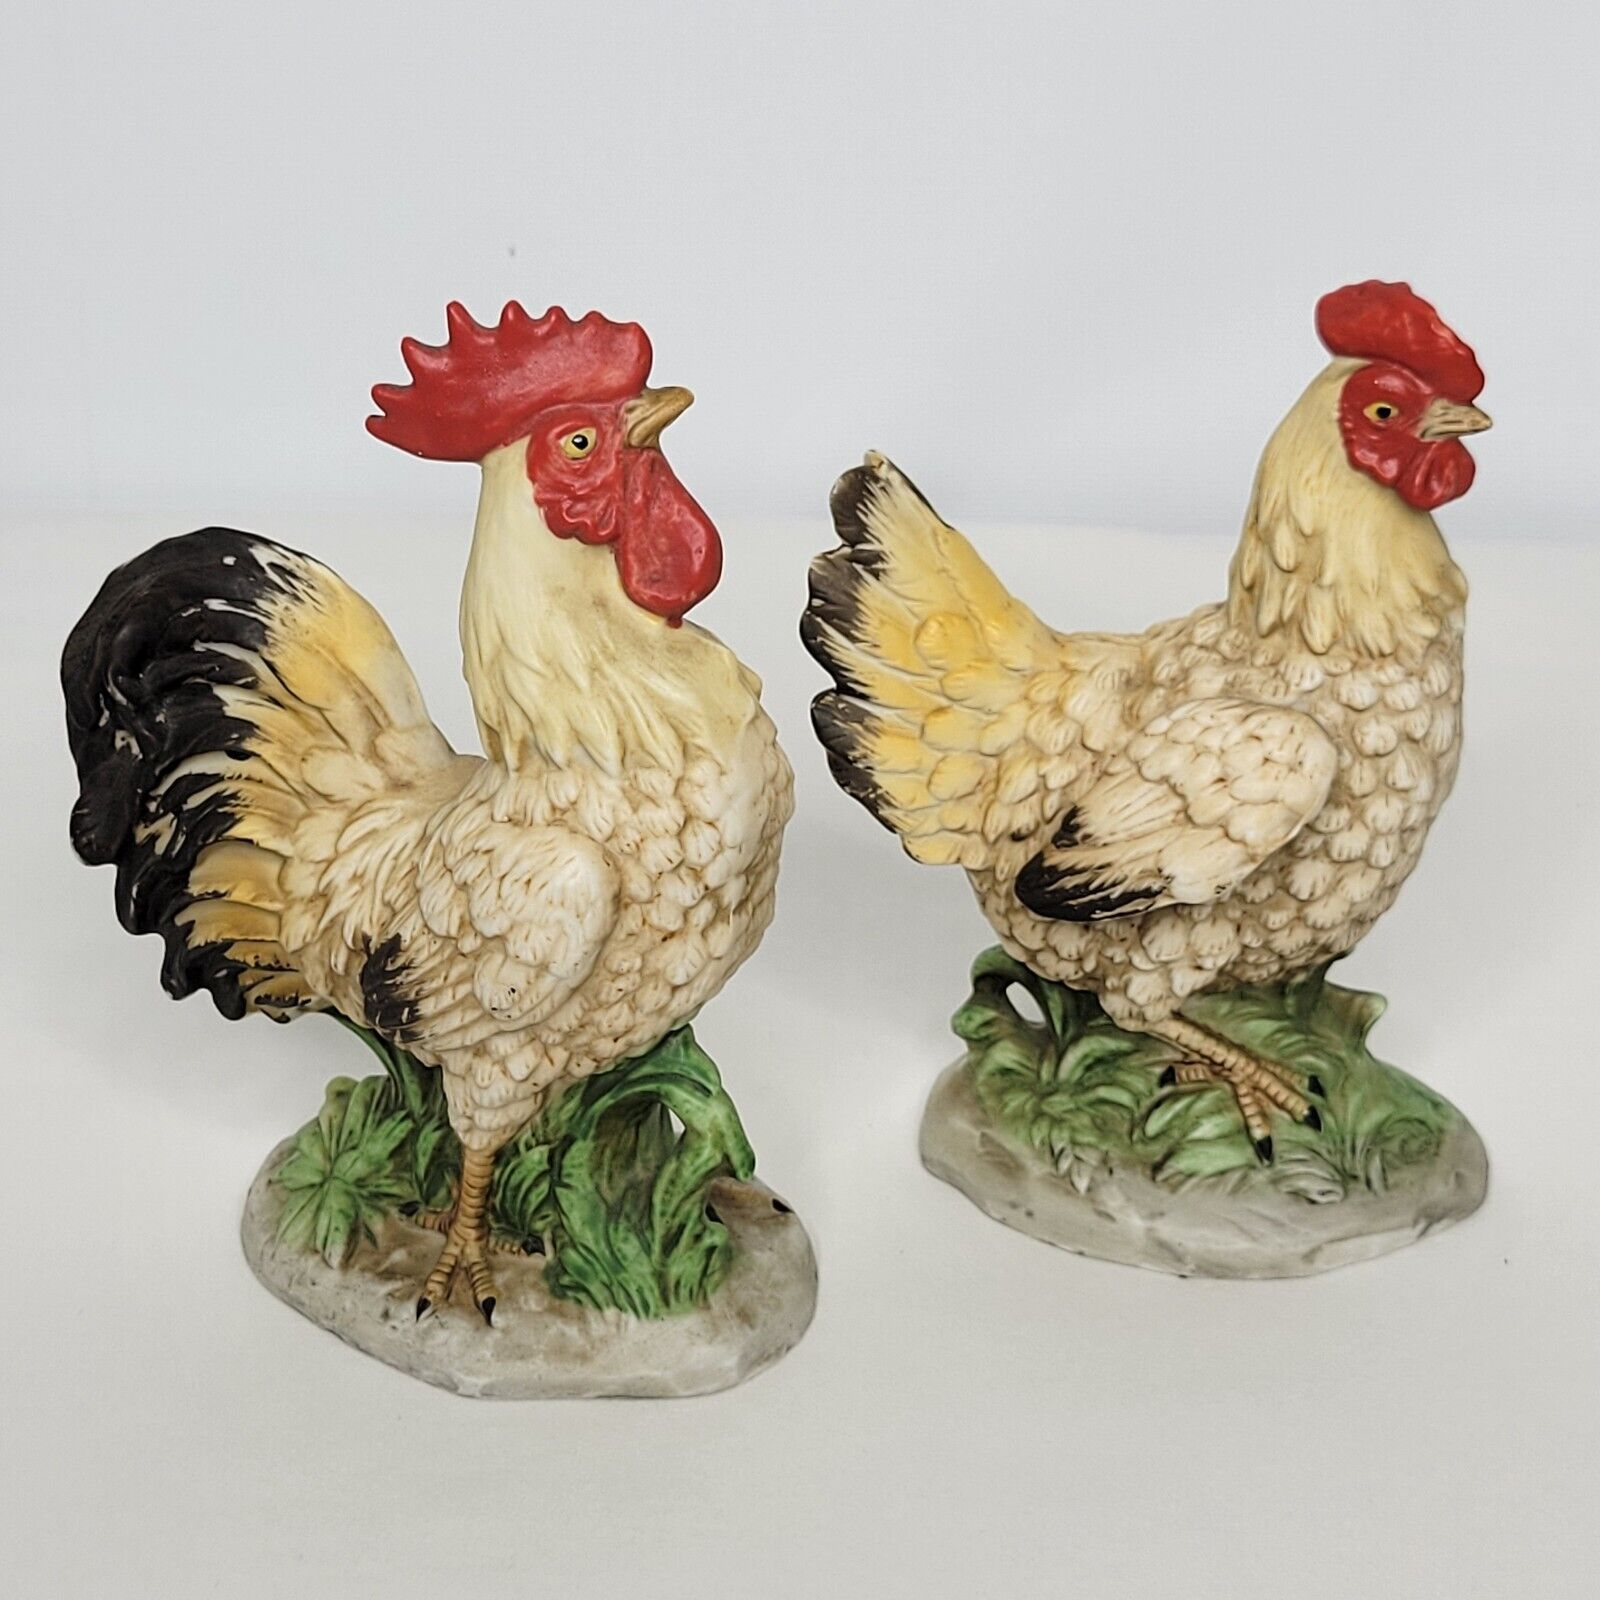 Pair of Vintage Homco Ceramic Rooster and Hen Figurines #1446 Farmhouse Country